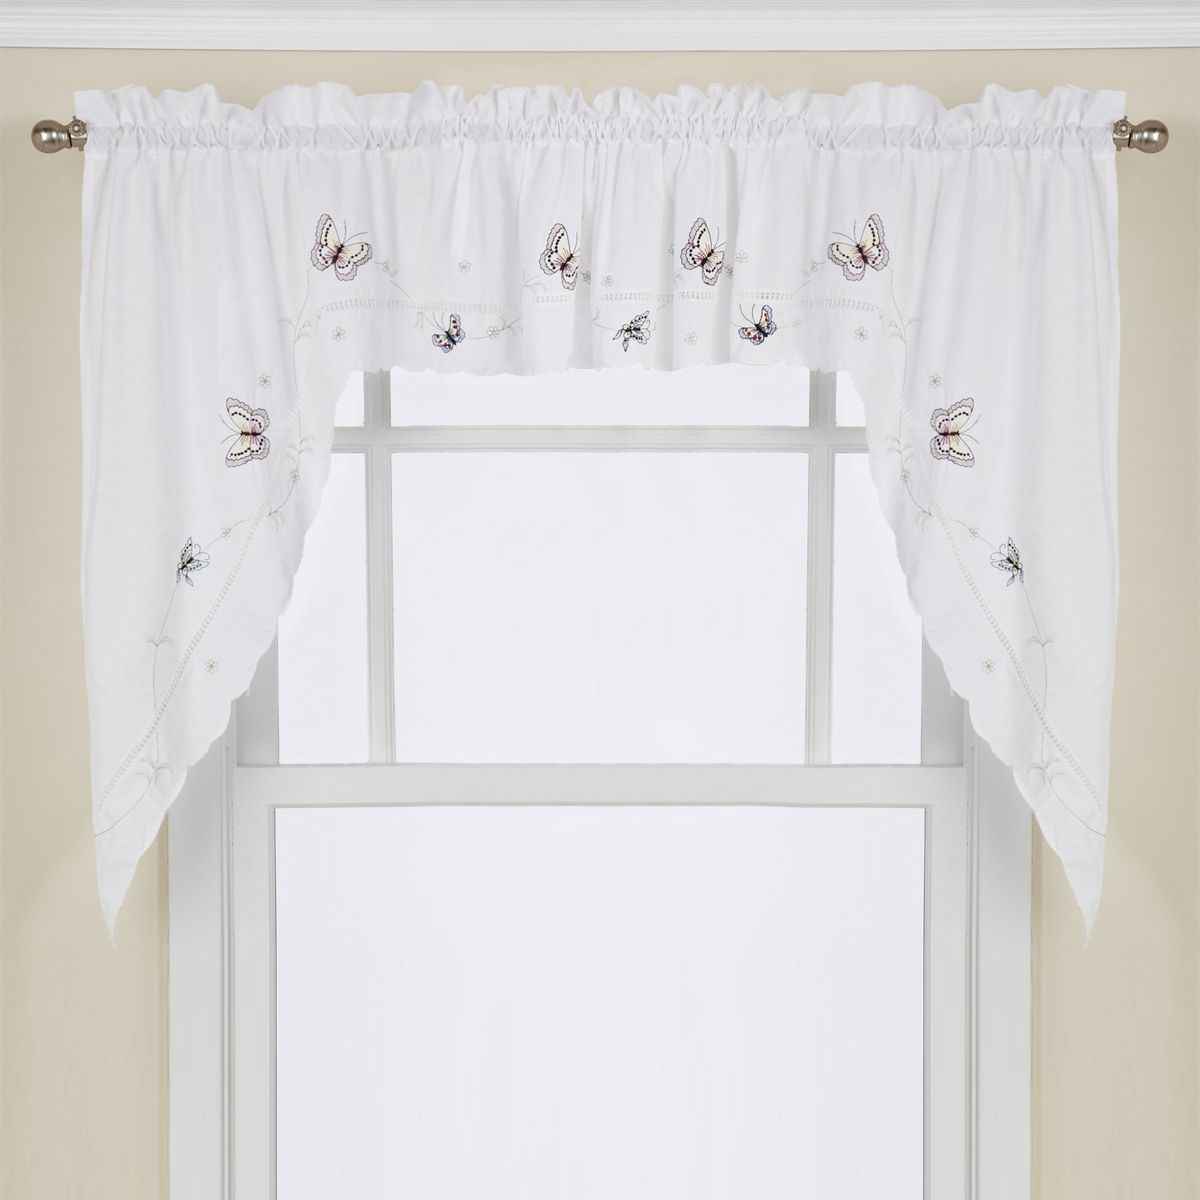 Details About Monarch Butterfly White Kitchen Curtain Embroidered 24" Tier,  Swag & Valance Set Within Urban Embroidered Tier And Valance Kitchen Curtain Tier Sets (View 13 of 20)